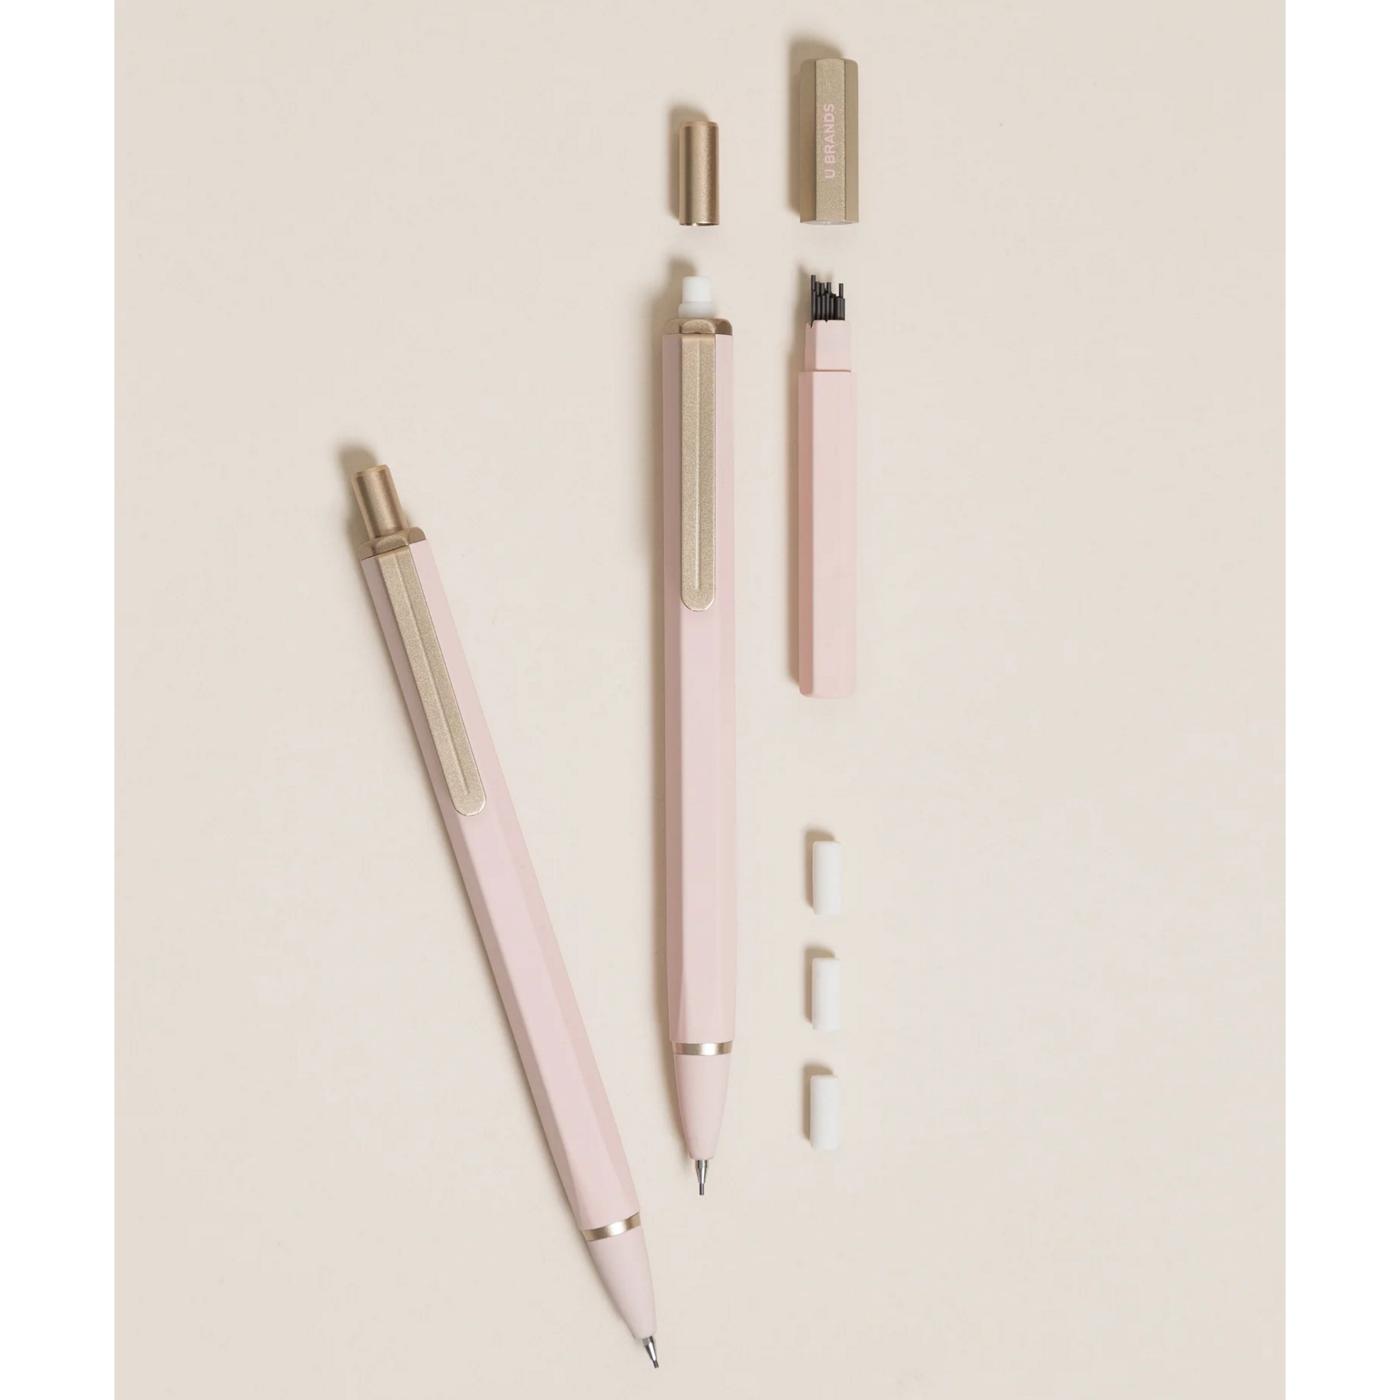 U Brands The Cambria 0.7mm Soft Touch Mechanical Pencil Set - Blush; image 2 of 2